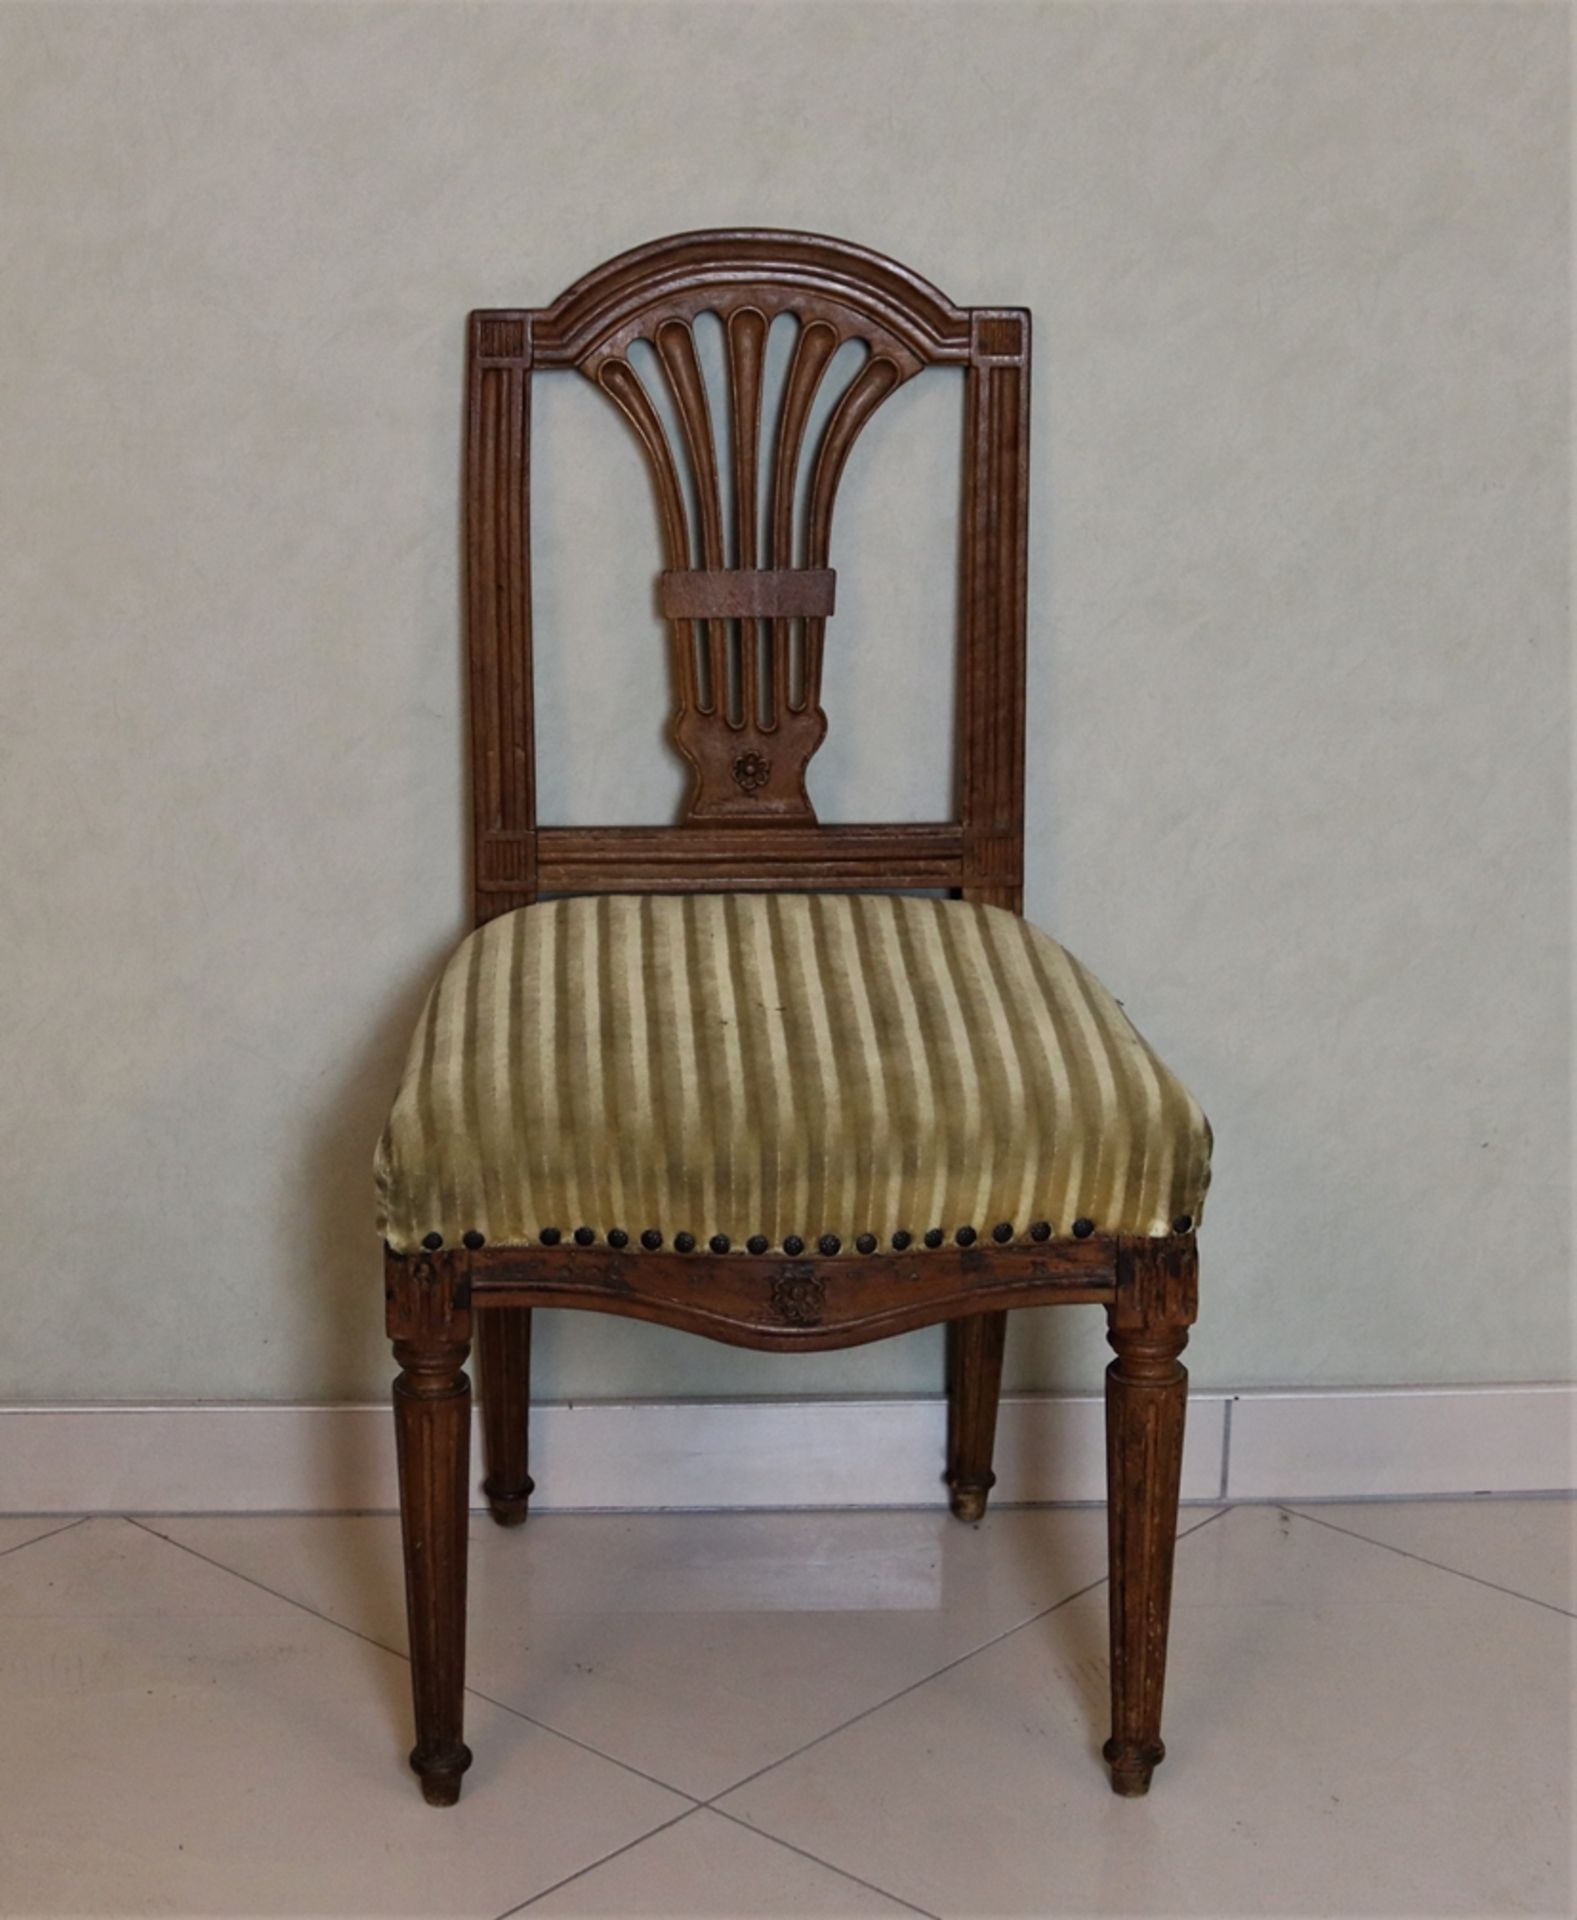 Classical upholstered chair before 1800, southern German